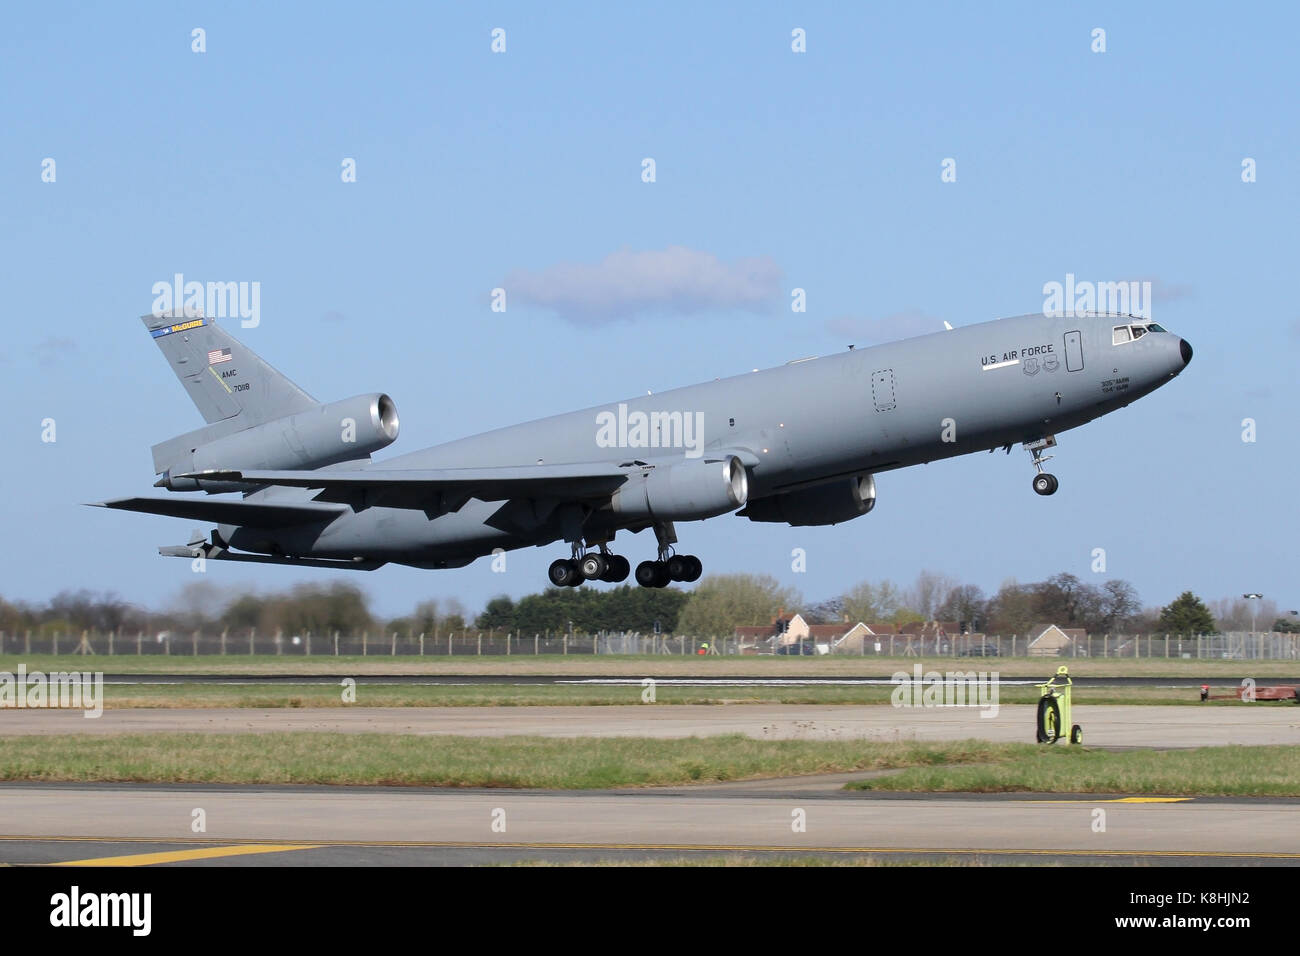 USAF KC-10A Extender climbing out after rotation from RAF Mildenhall. 59 of these aircraft are still operated by the USAF. Stock Photo